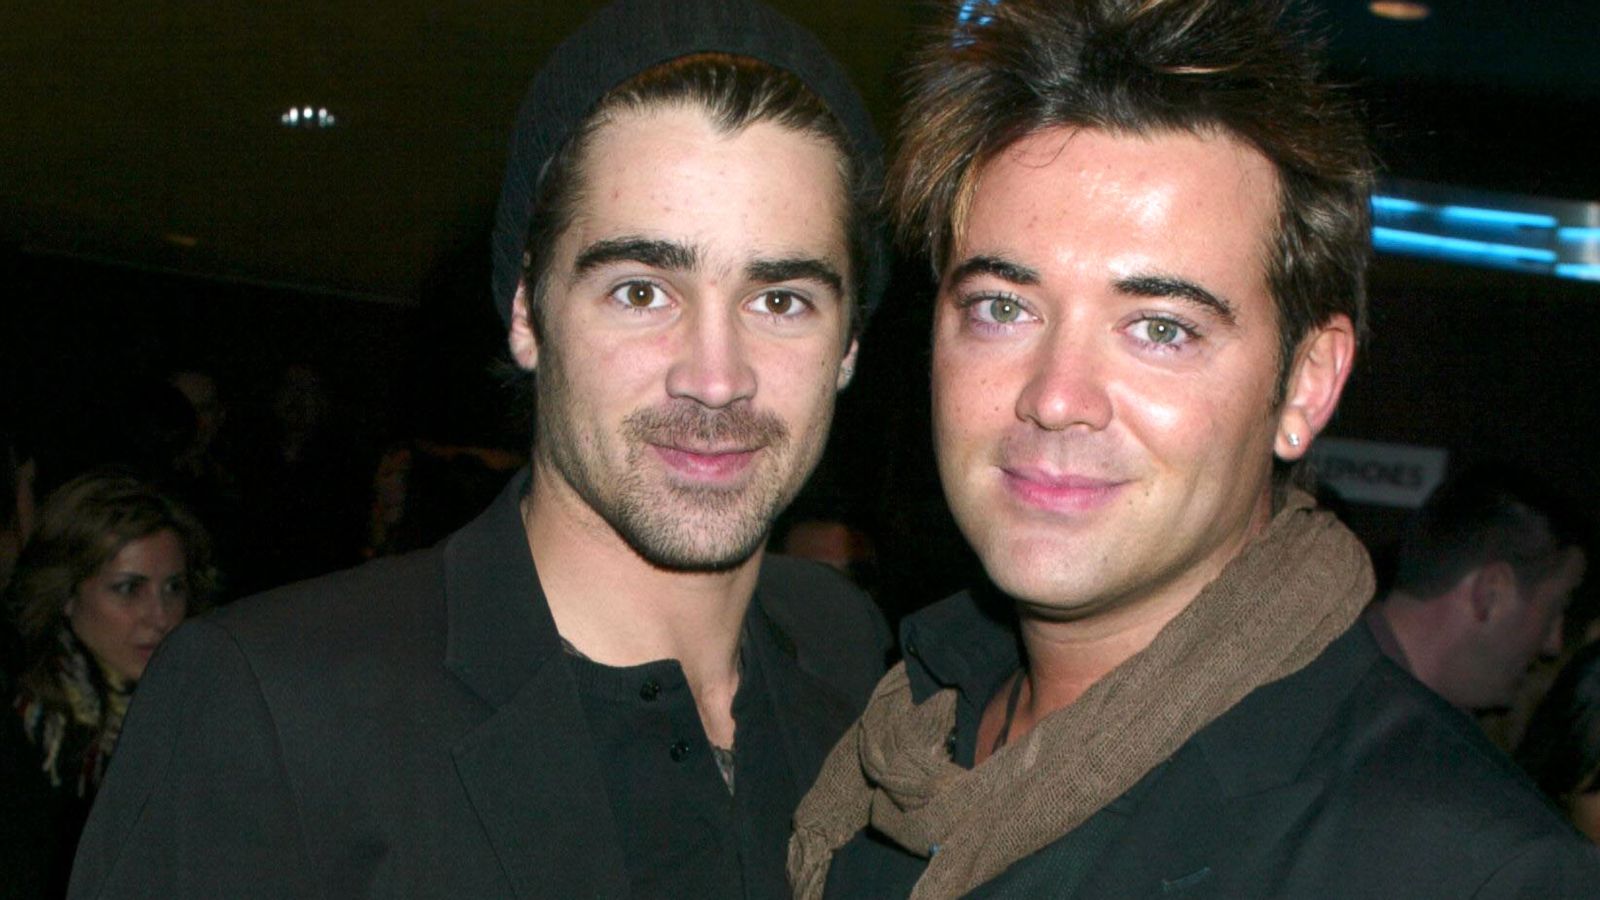 Brother Forced Gay Sex - Colin Farrell Defends His Gay Brother in Same-Sex Marriage Plea - ABC News